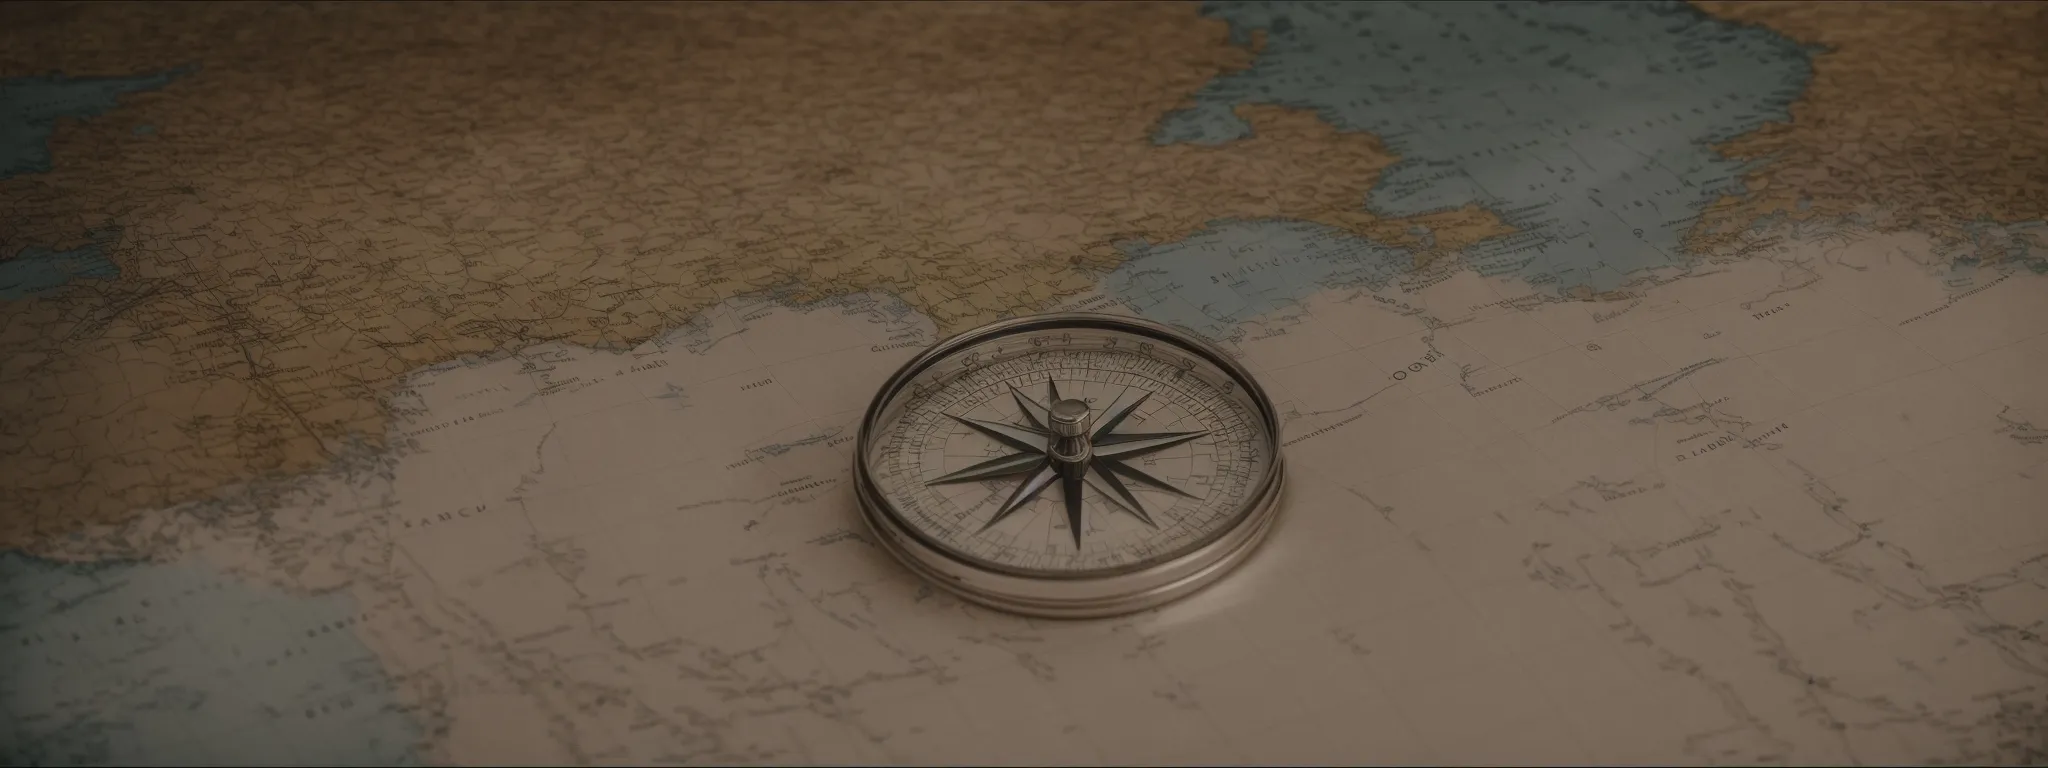 a compass and map on a table, symbolizing navigational tools similar to the seo features of searchatlas.